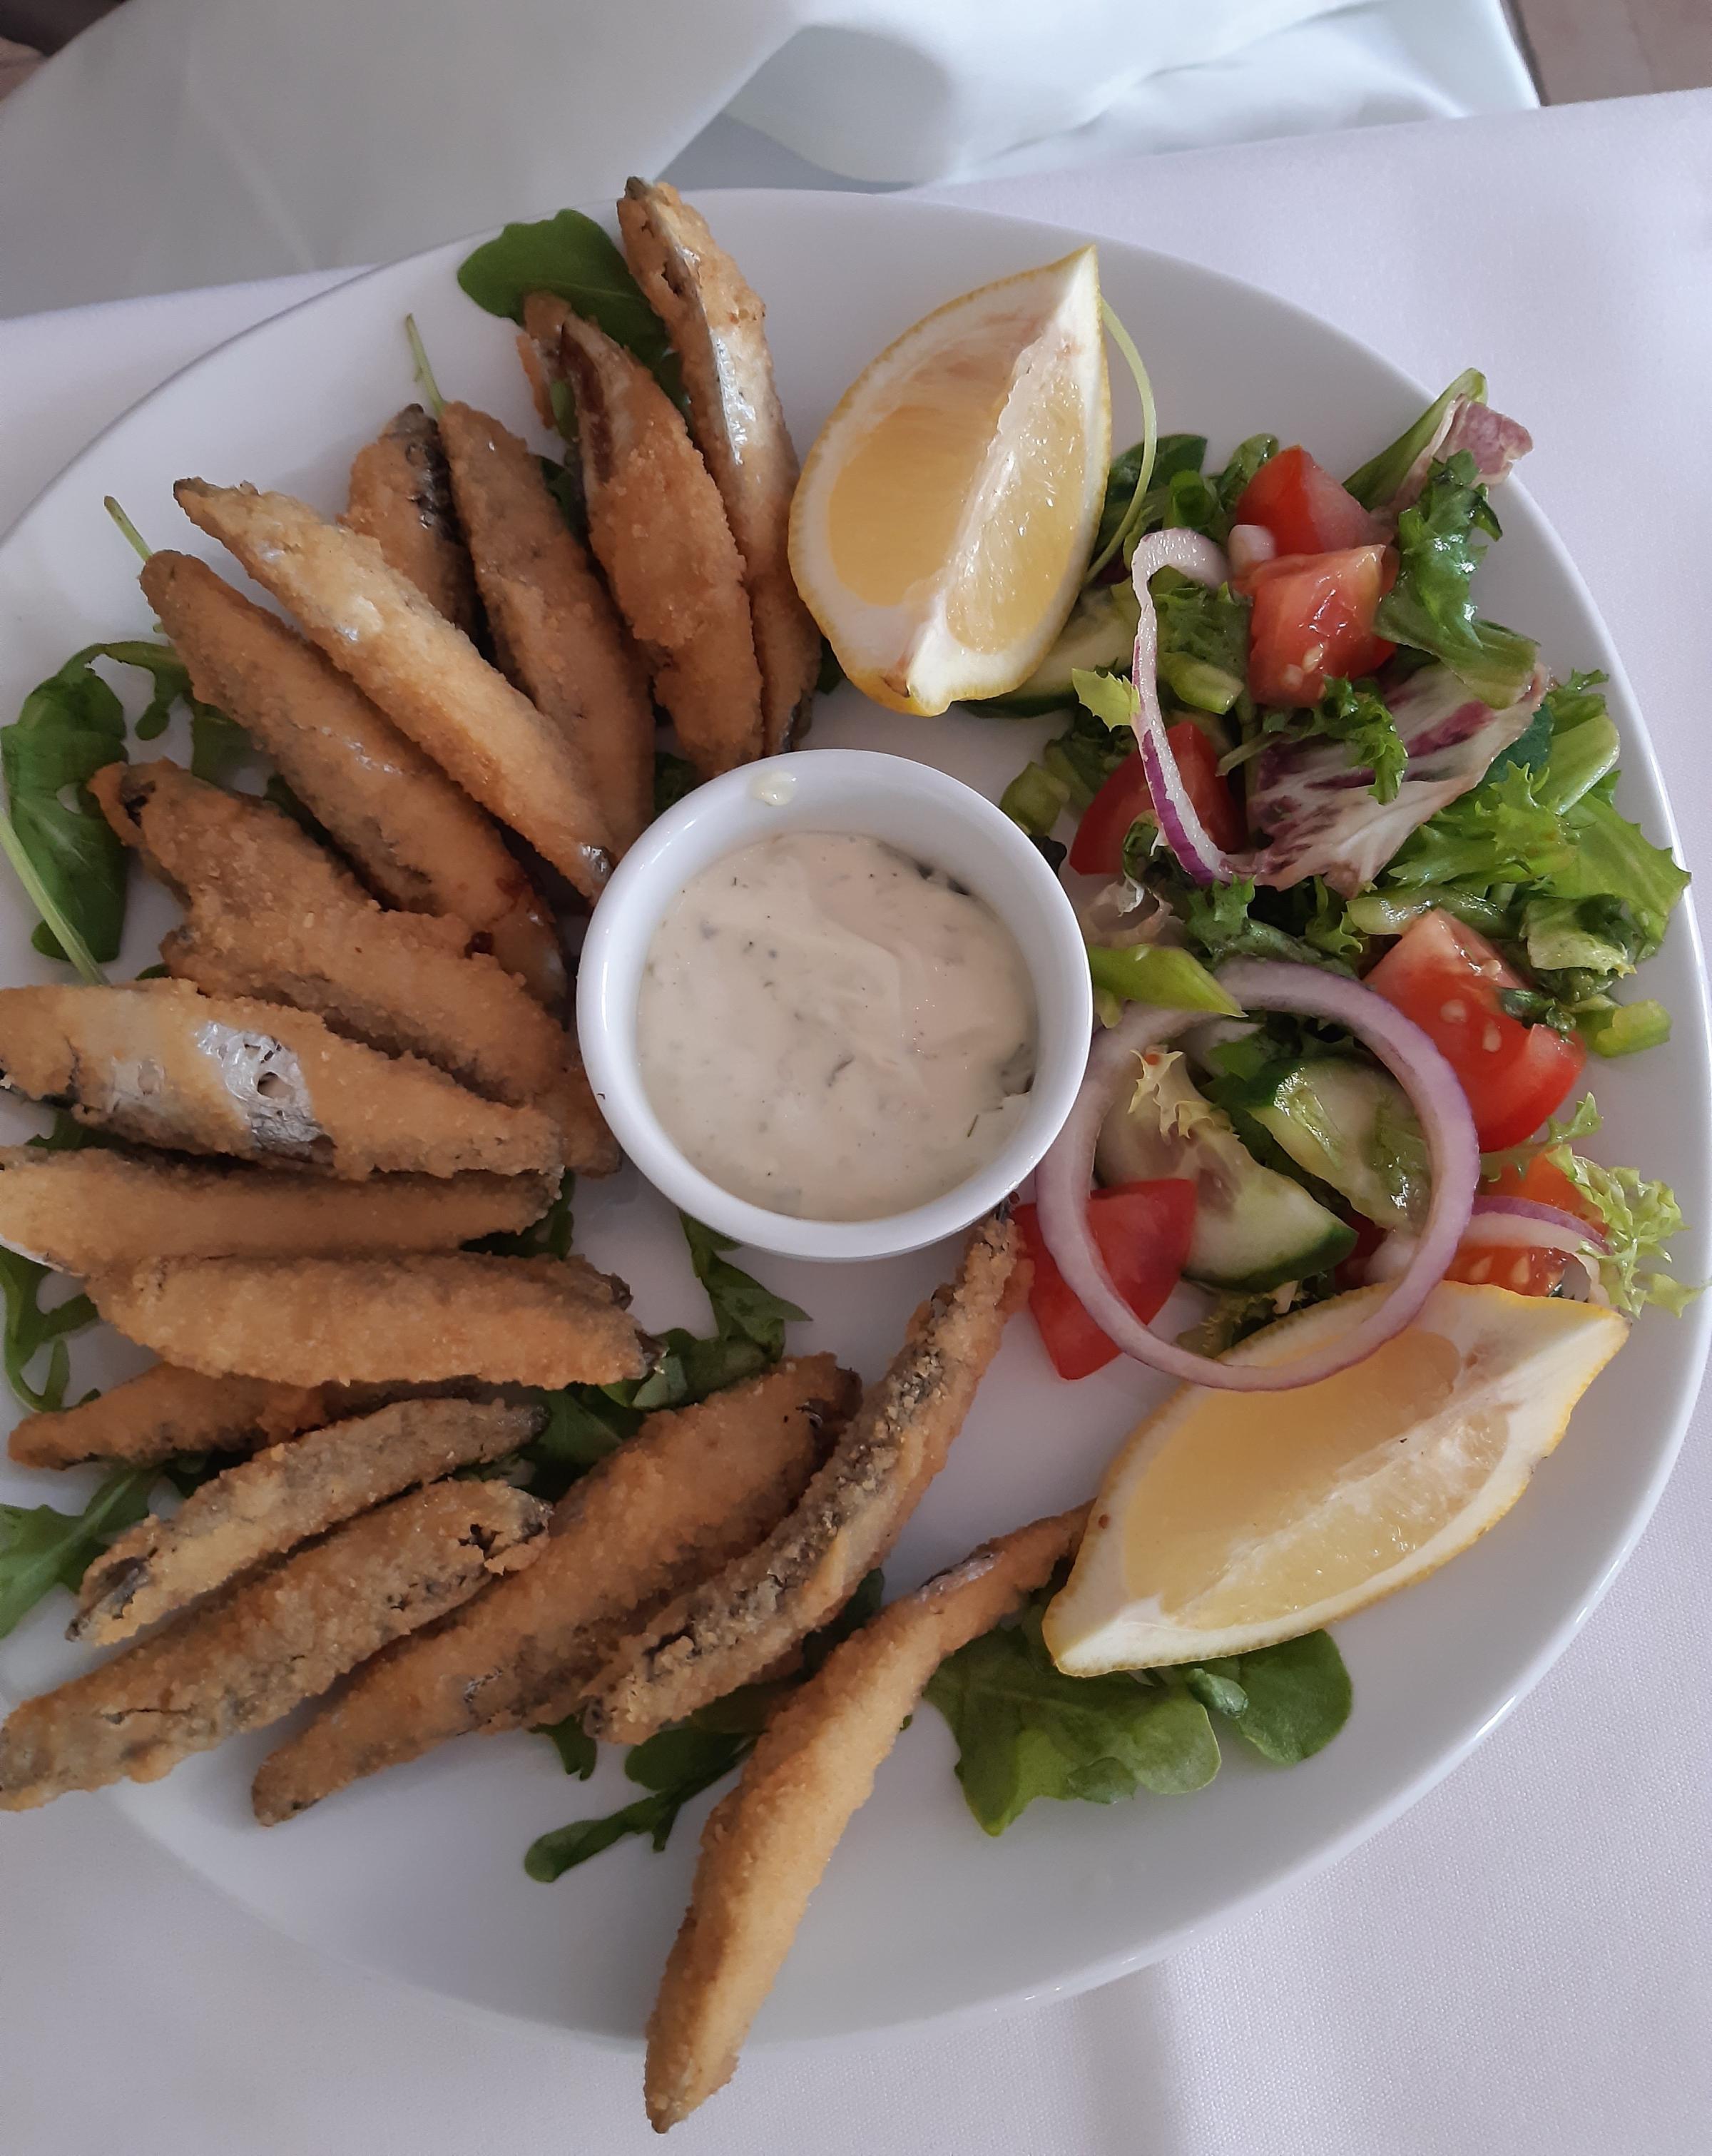 Whitebait at Primo Amore, Mold.